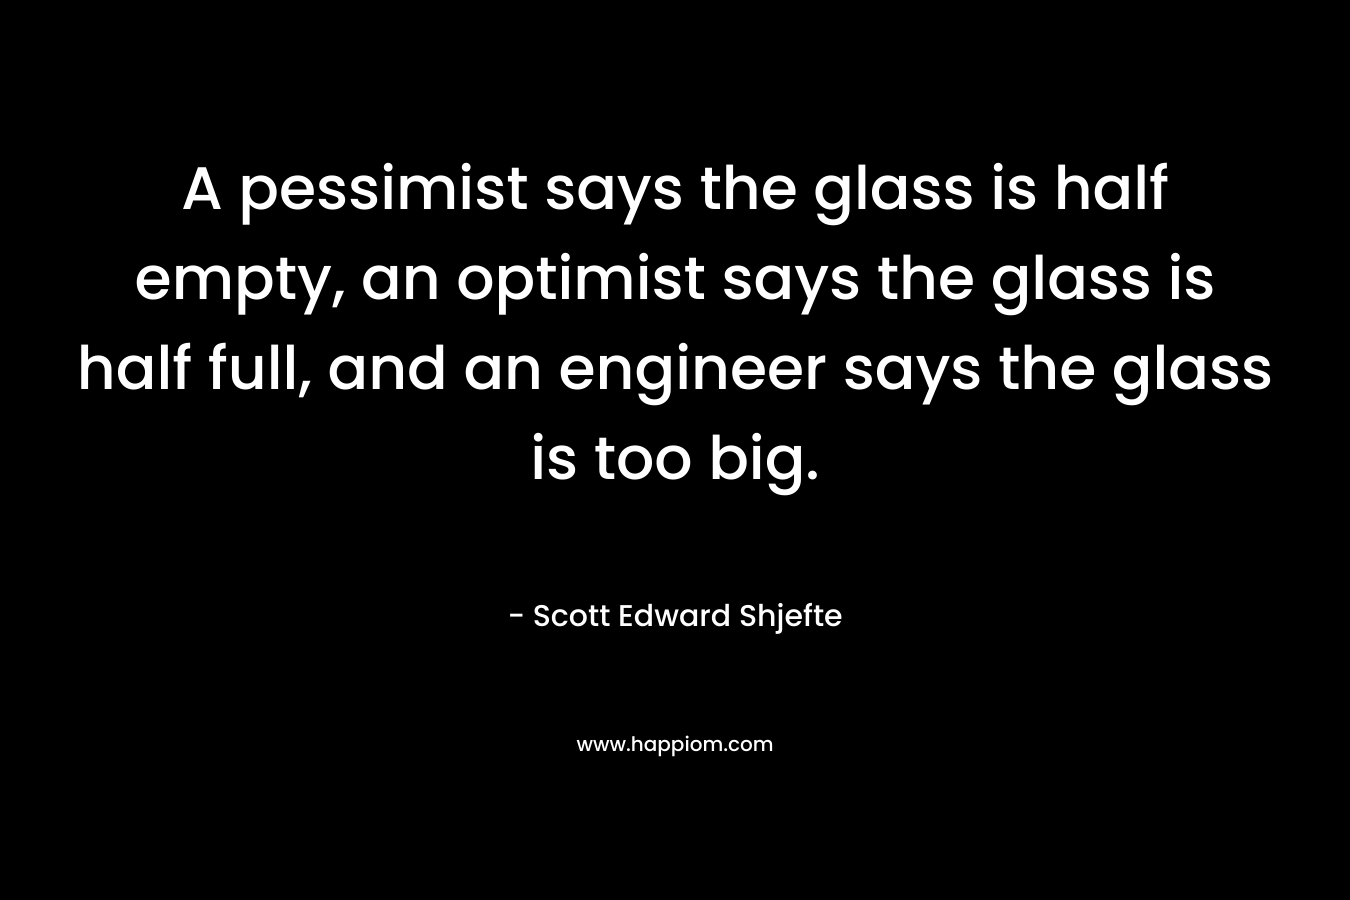 A pessimist says the glass is half empty, an optimist says the glass is half full, and an engineer says the glass is too big. – Scott Edward Shjefte